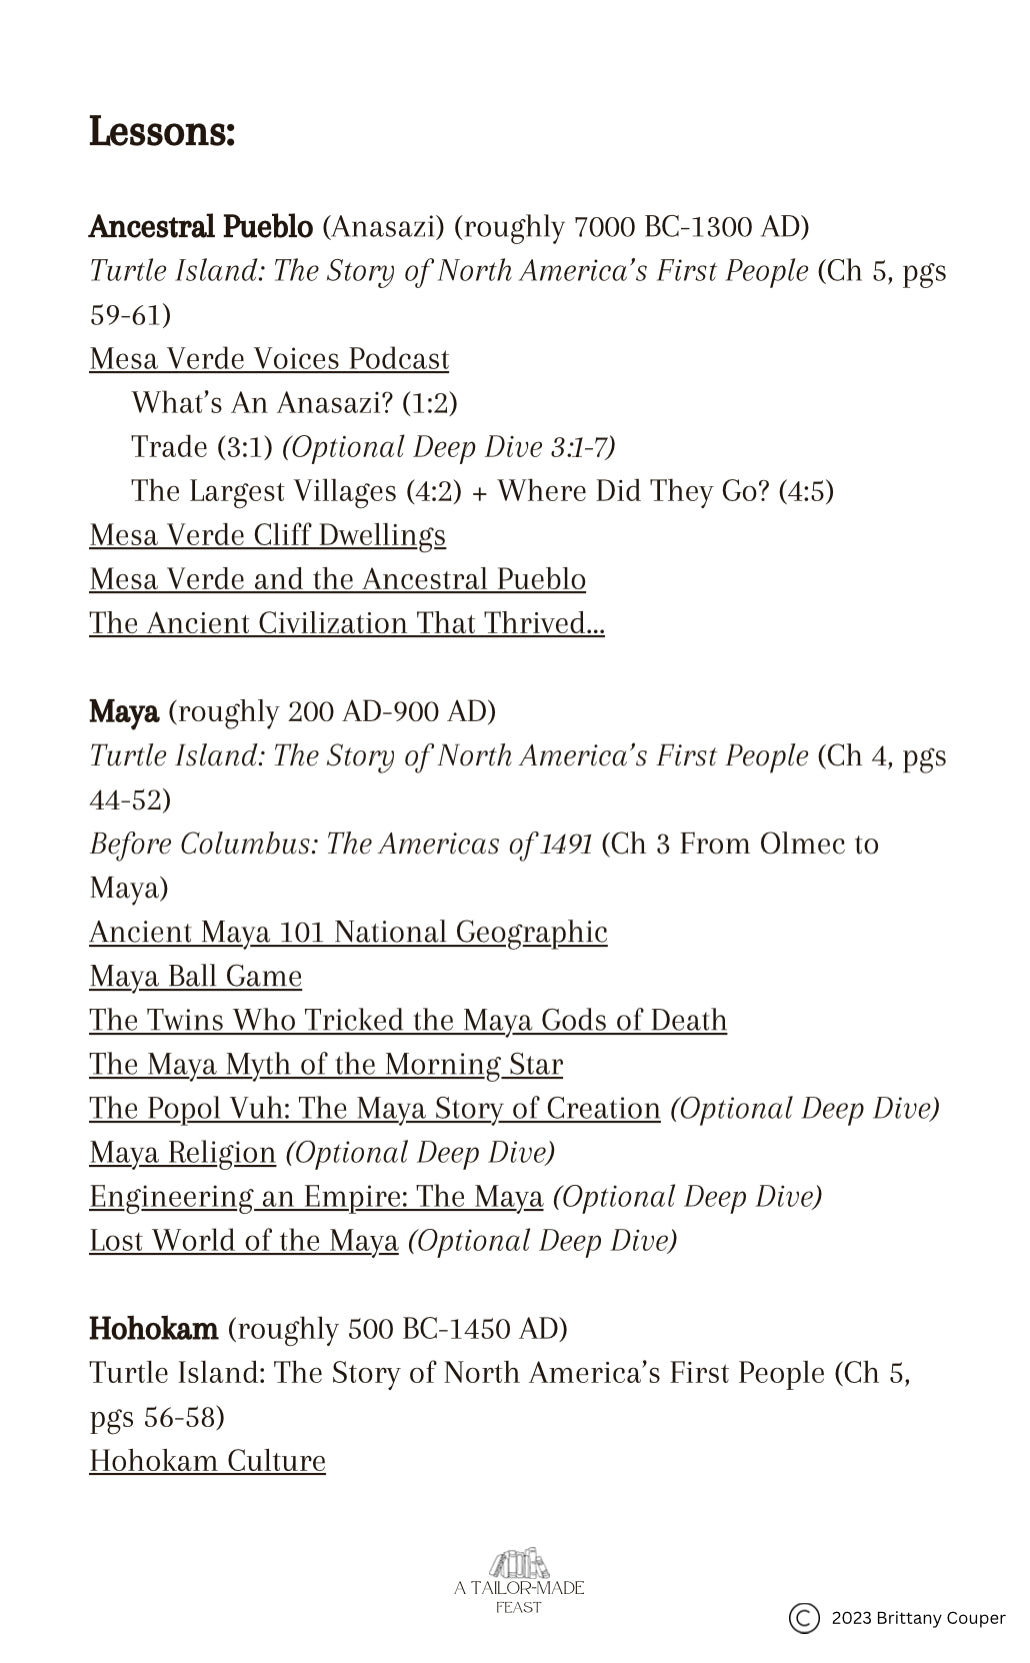 Middle Ages in the Americas History Guide (500-1600 AD)